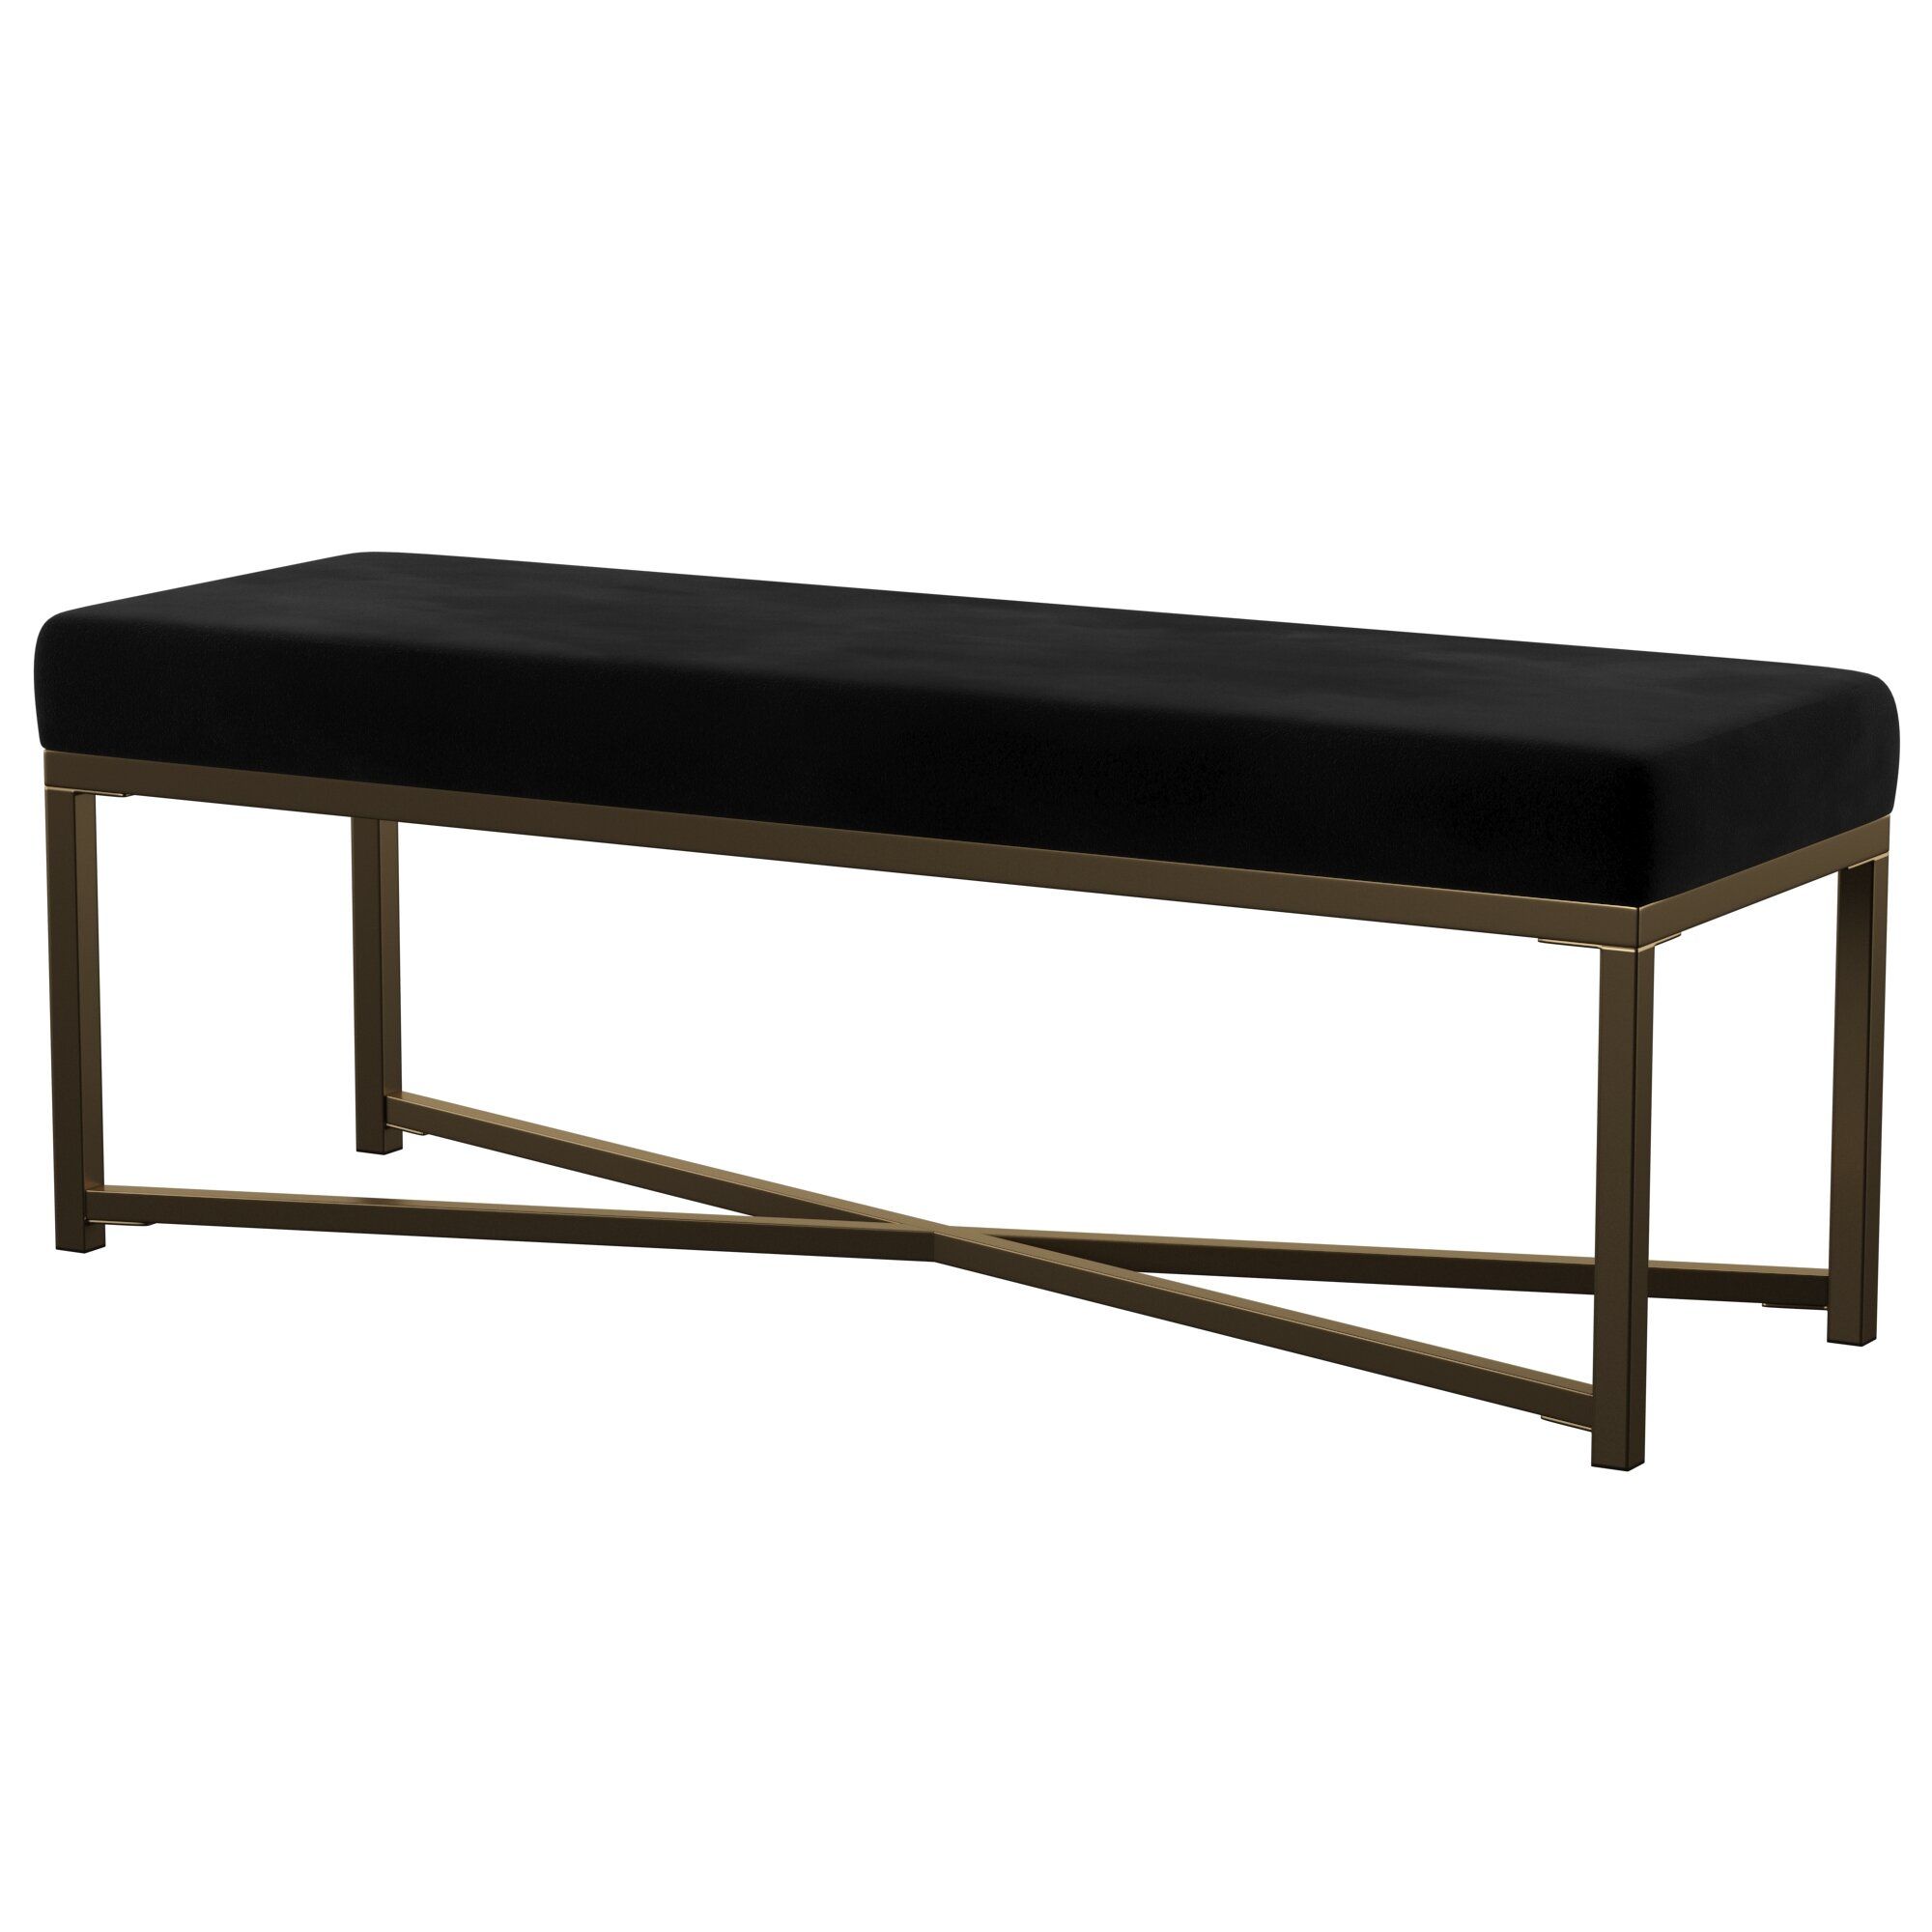 Lonon Rectangle Velvet Bench For Most Current Lonon 3 Piece Dining Sets (View 18 of 20)